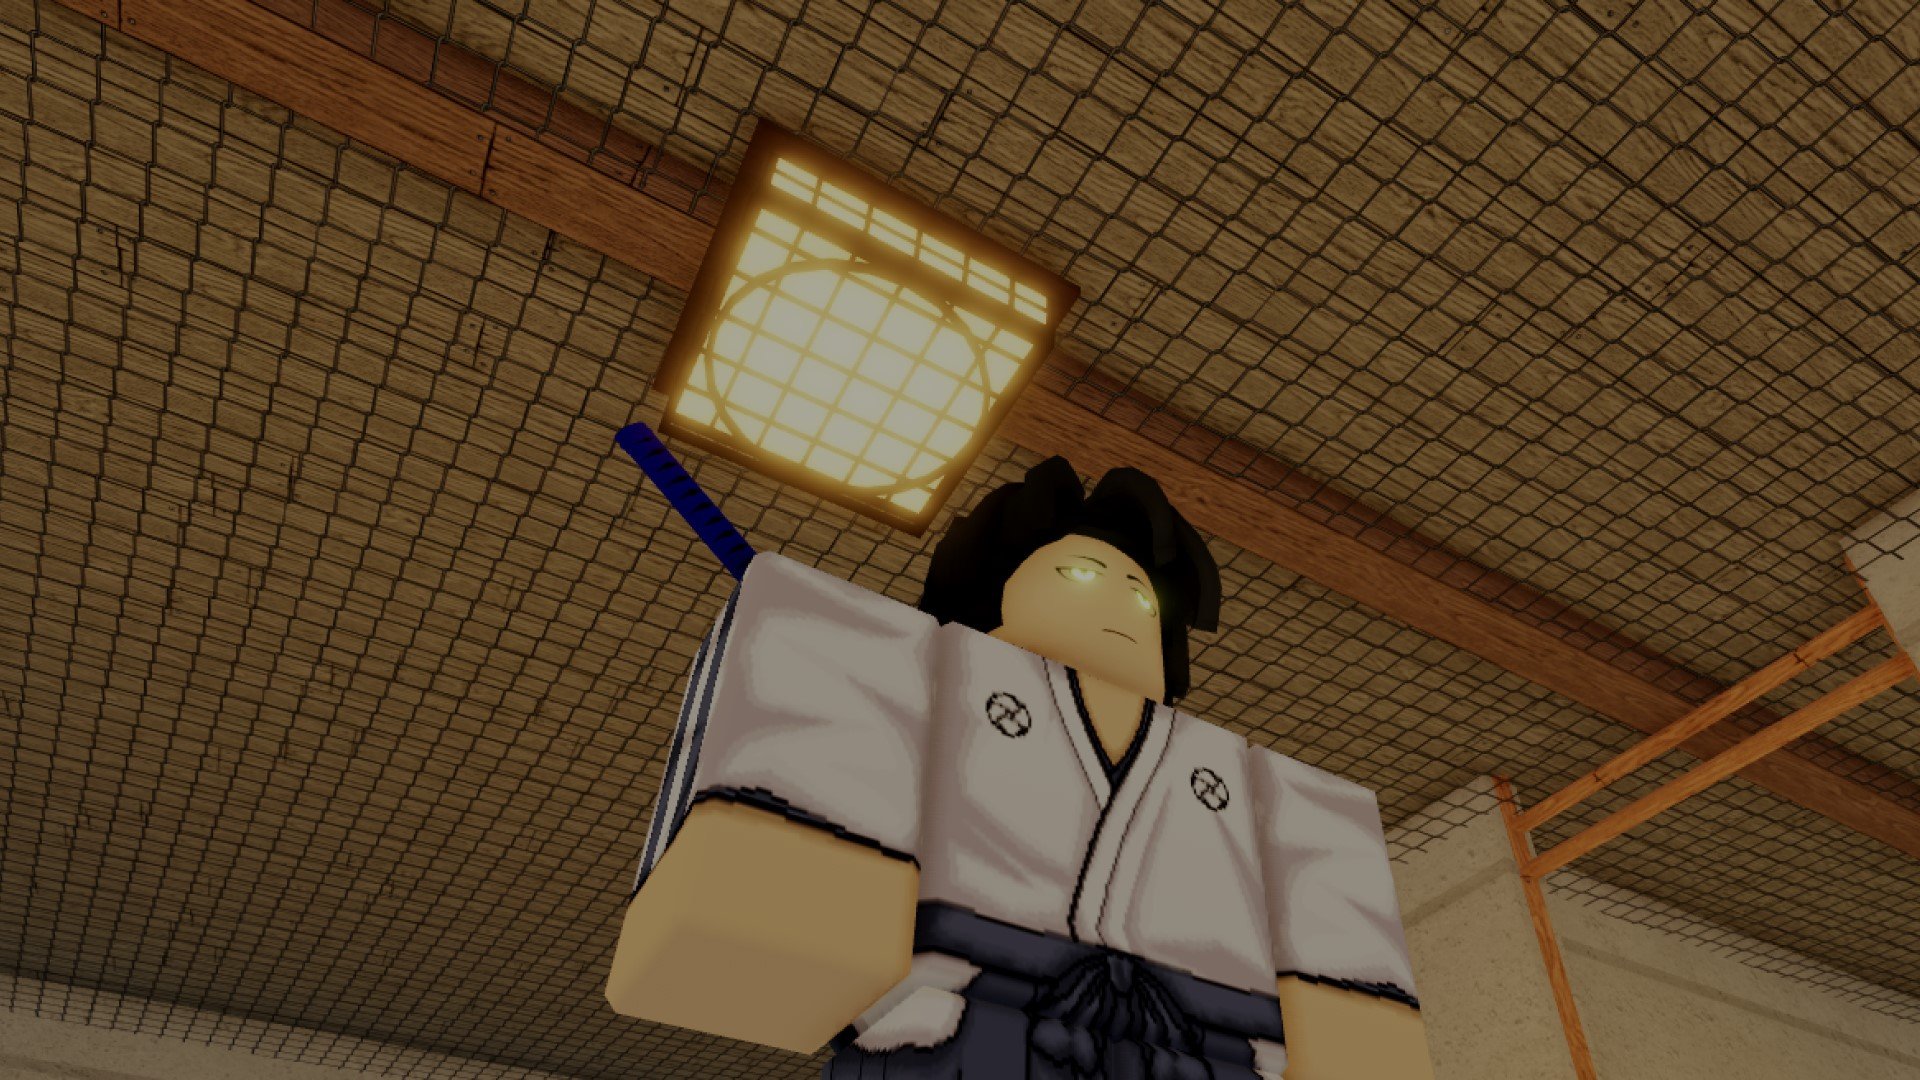 A character from Roblox game Type Soul standing under a ceiling light in a wooden building.